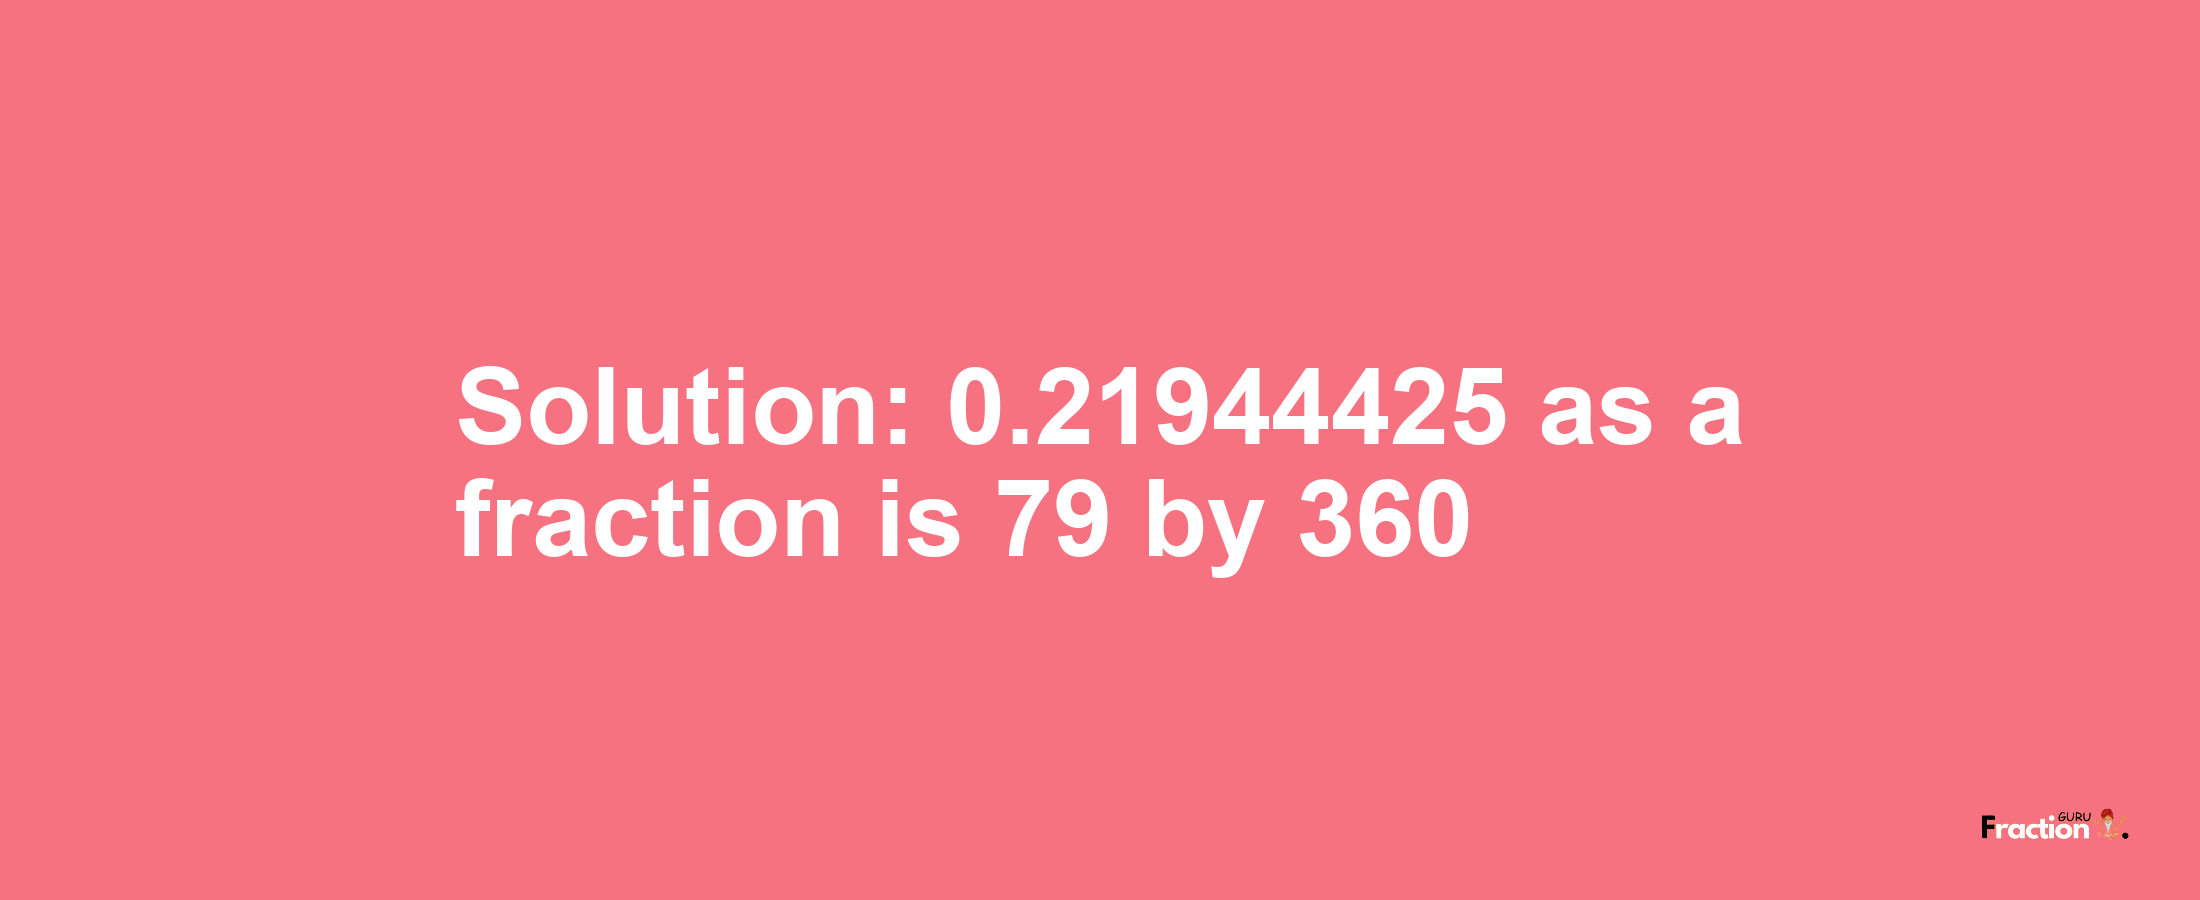 Solution:0.21944425 as a fraction is 79/360